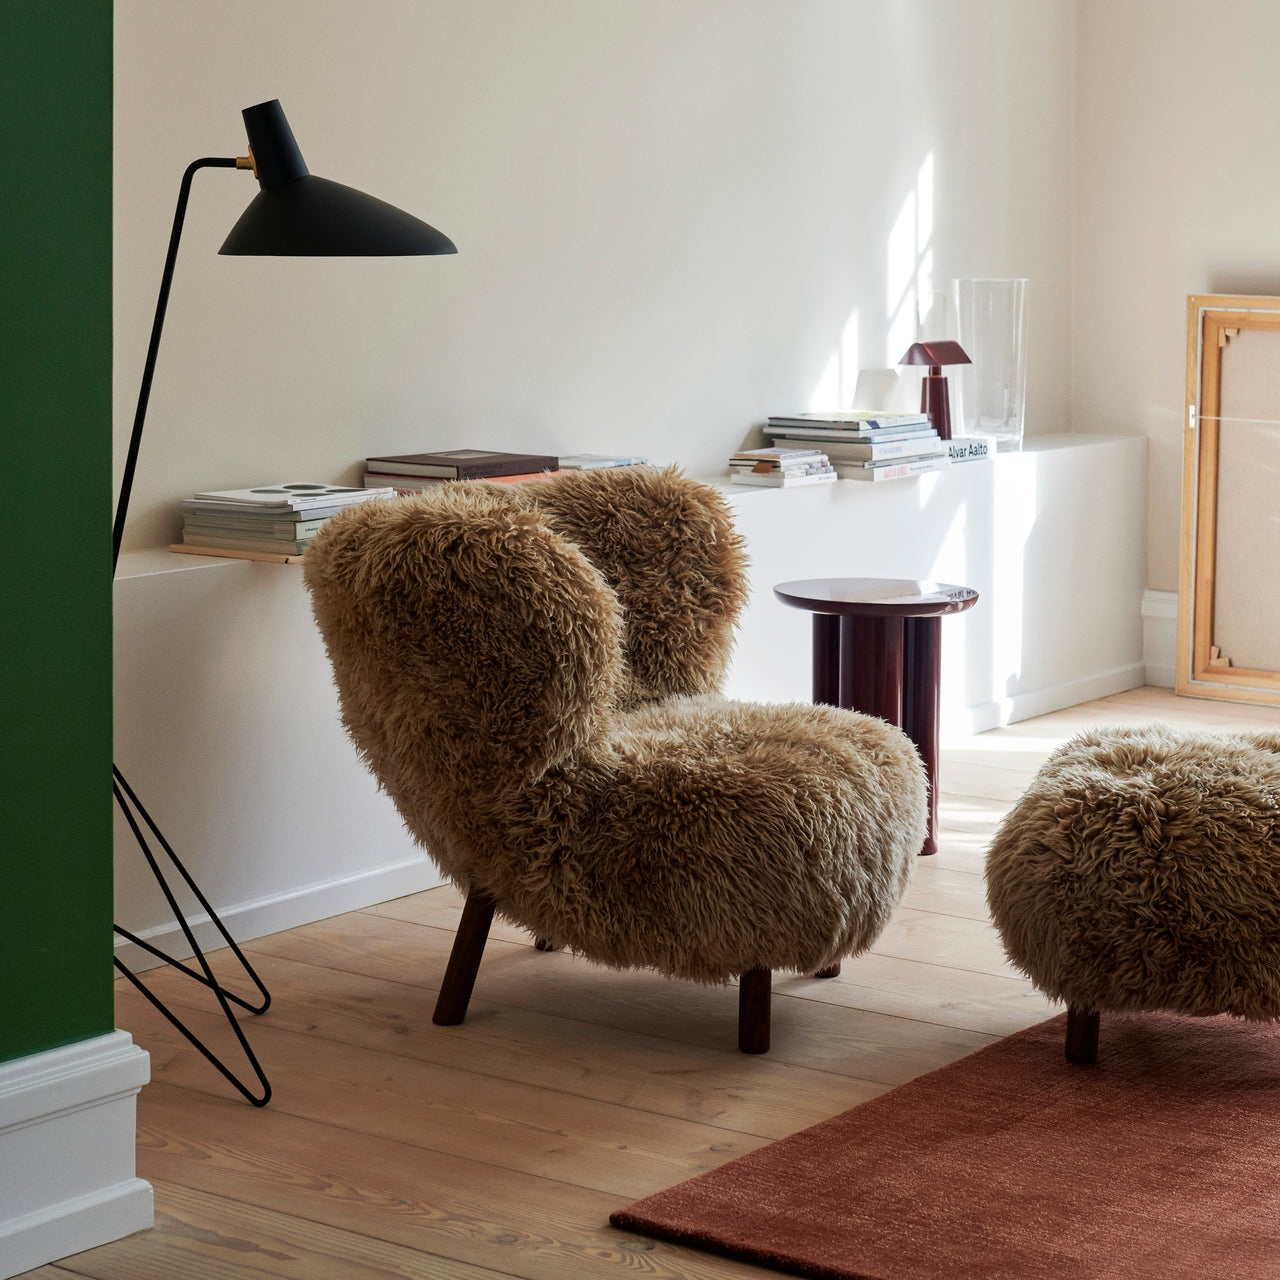 Little Petra VB1 + Pouf ATD1 | Buy &Tradition online at A+R